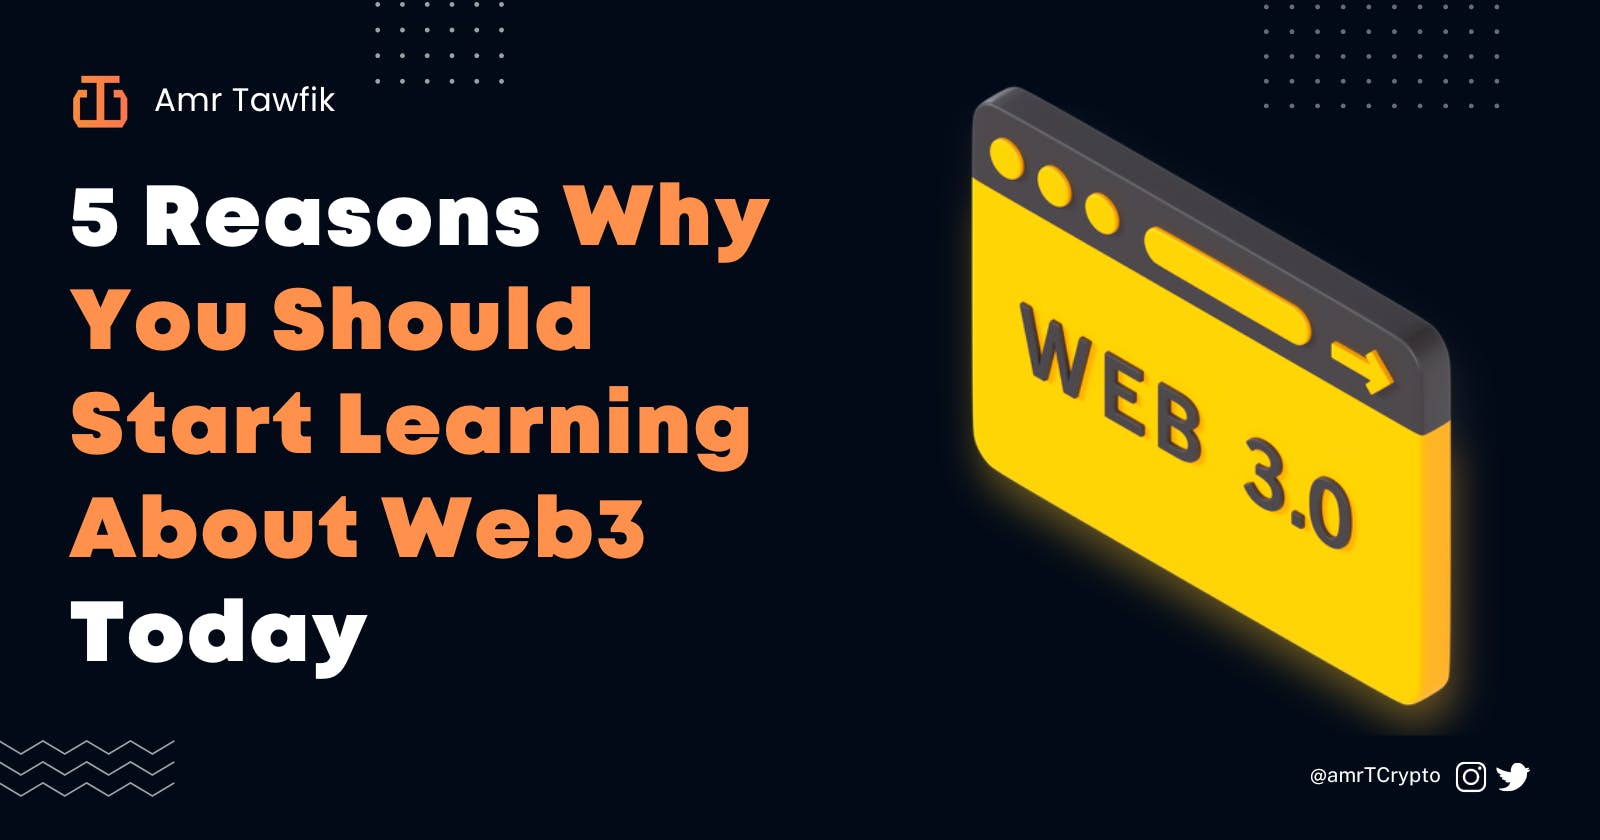 5 Reasons Why You Should Start Learning About Web3 Today